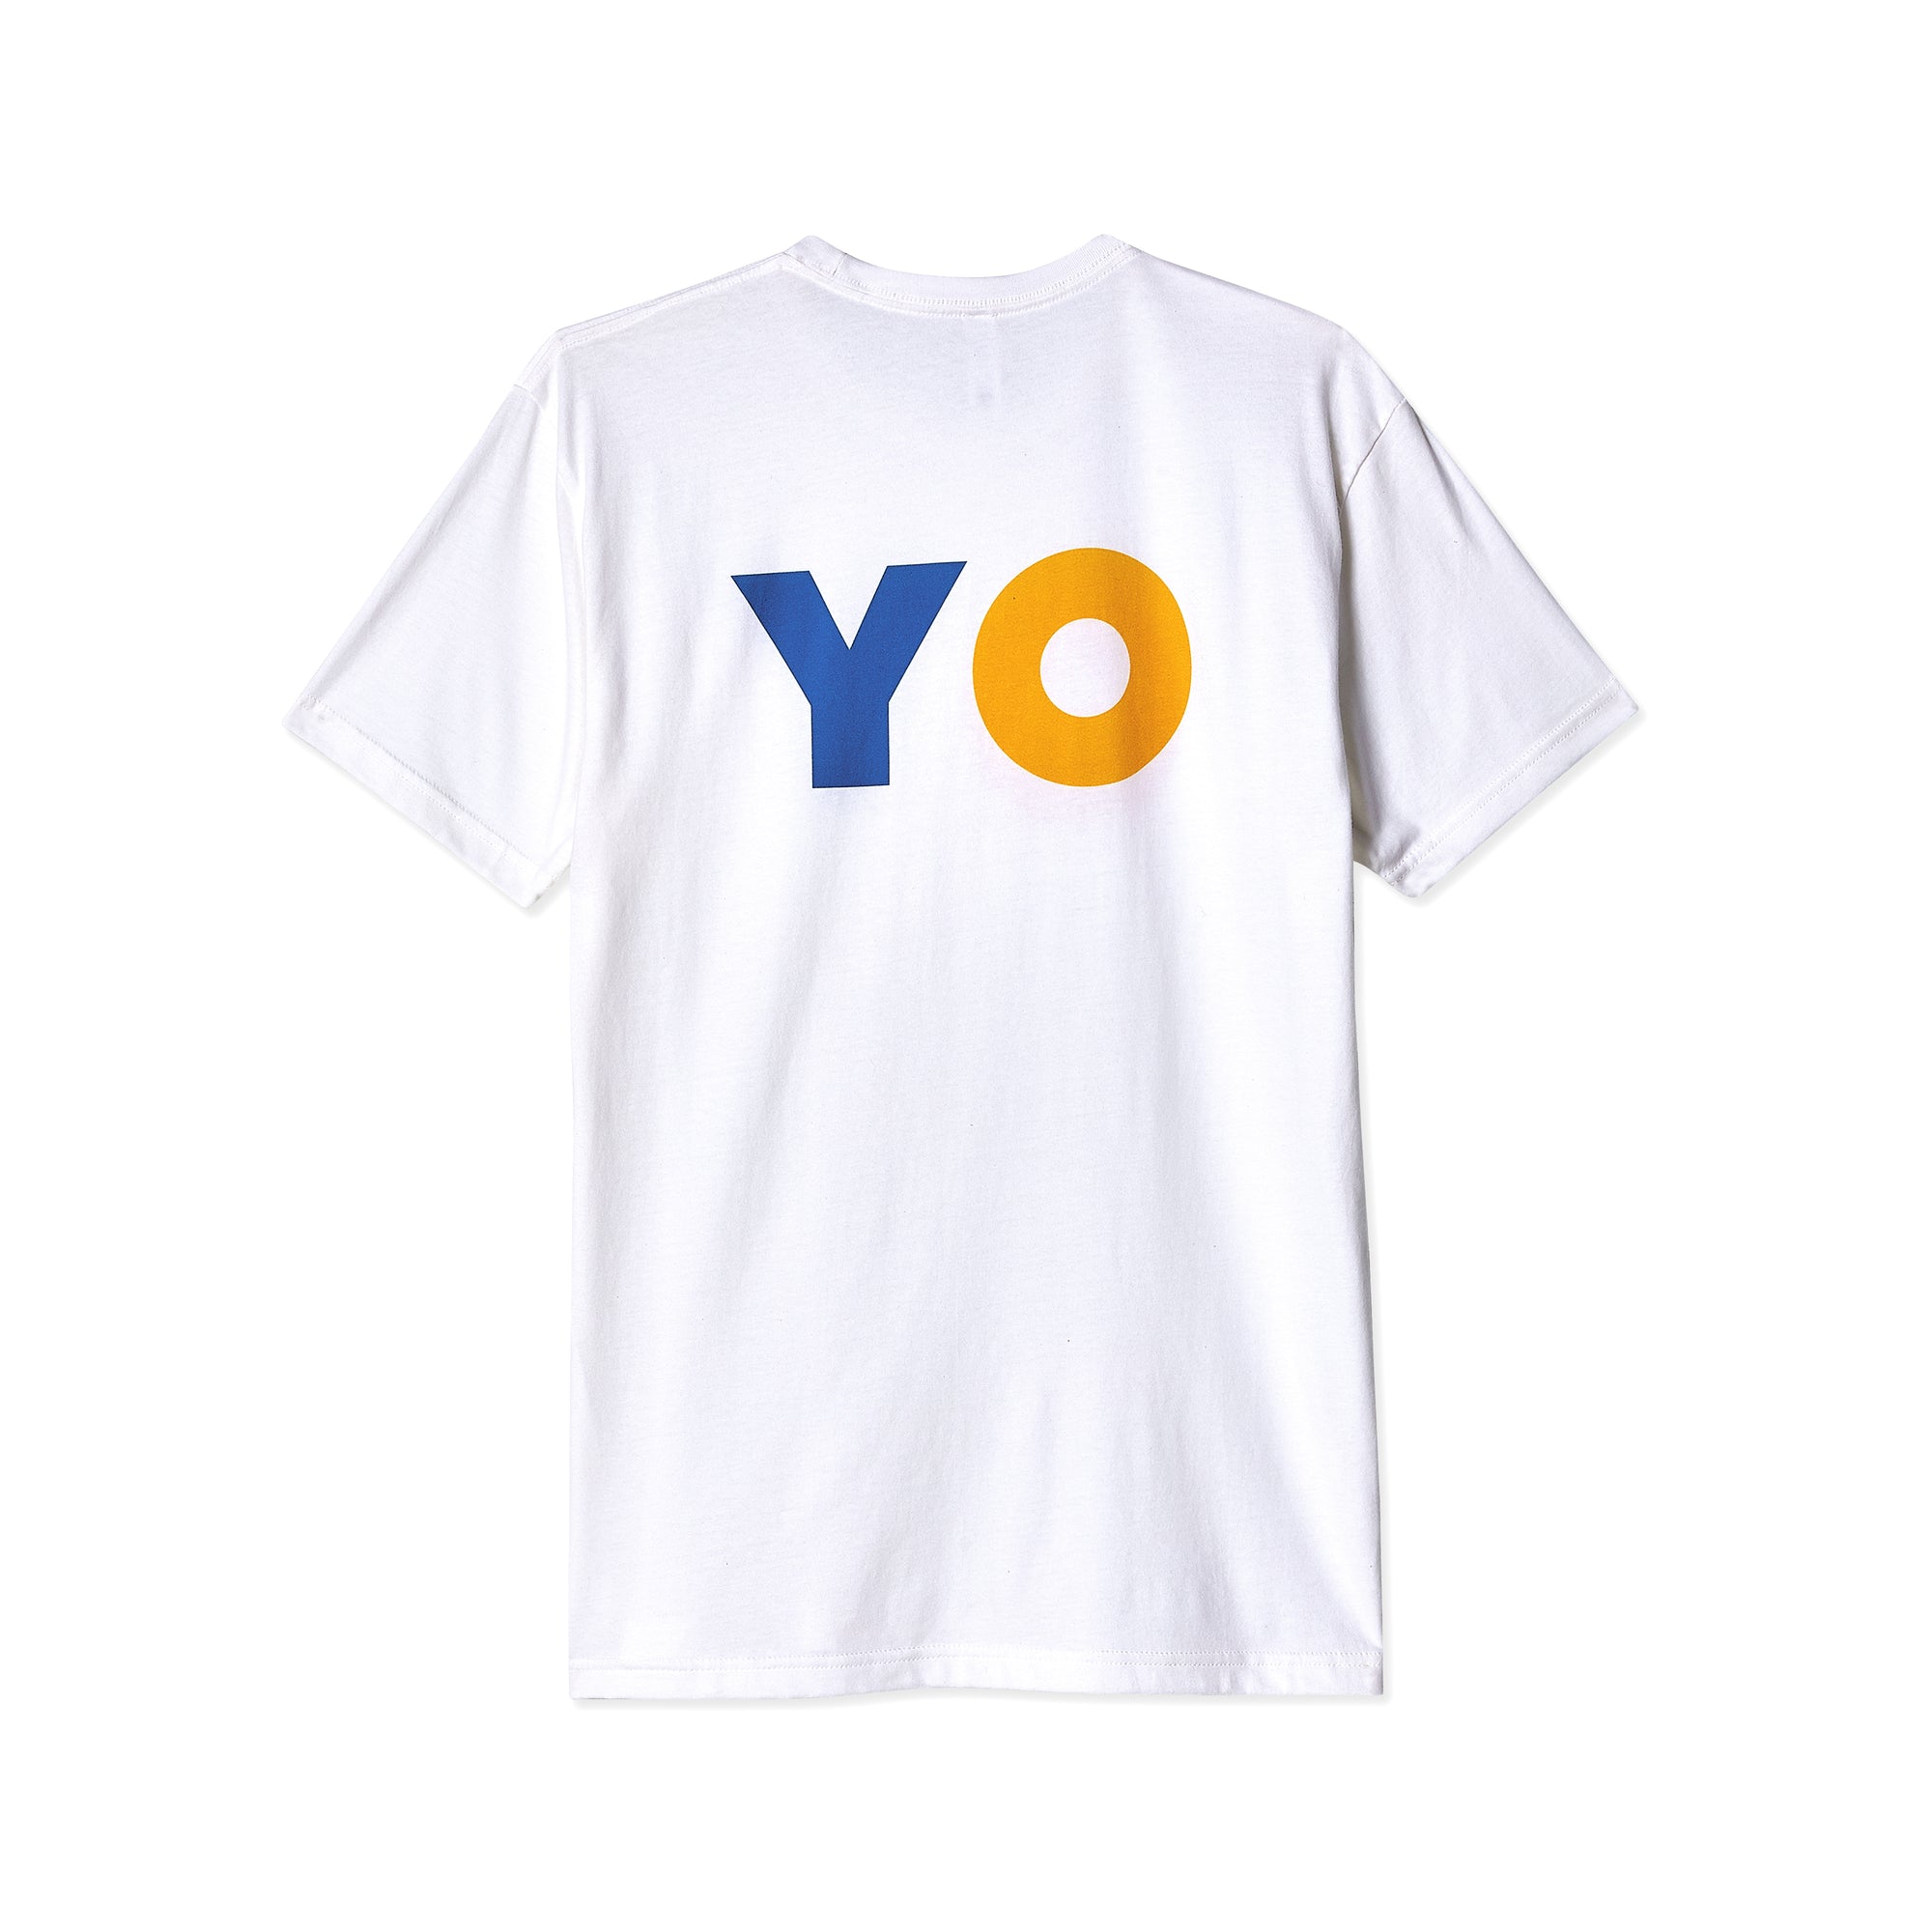 Out Of Order for Ukraine Pride - ’Oy’ Tee - (White) view 2